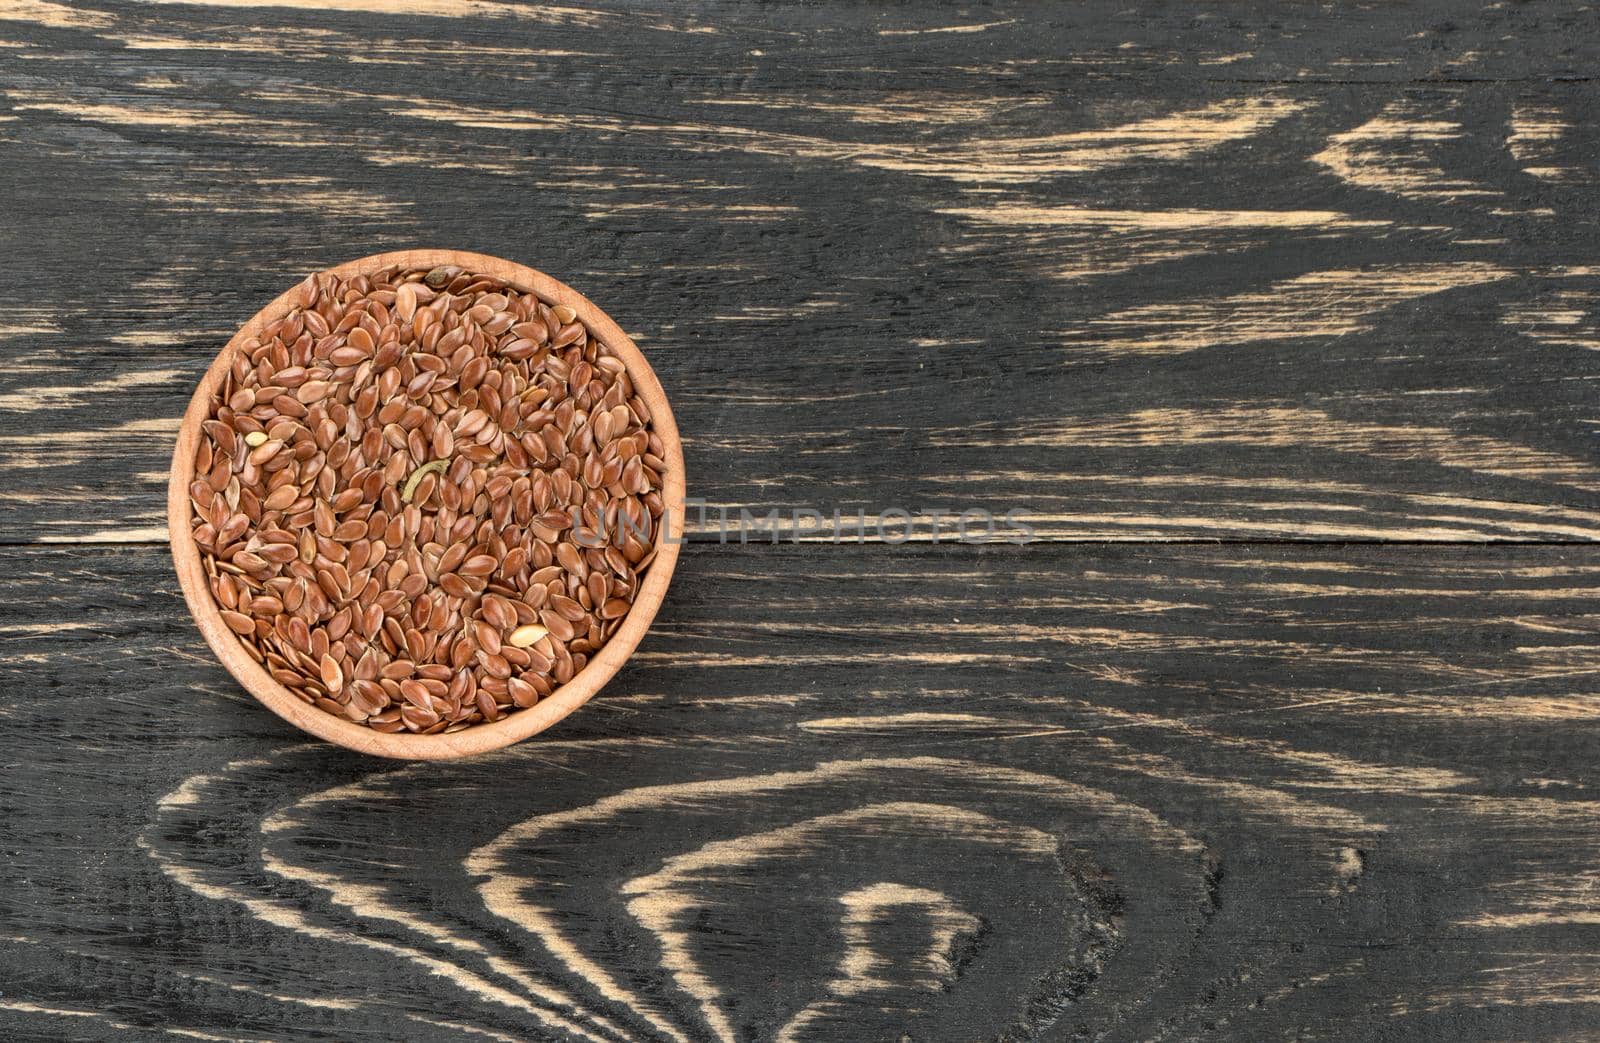 Flax seeds in the empty bowl on wooden background, top view